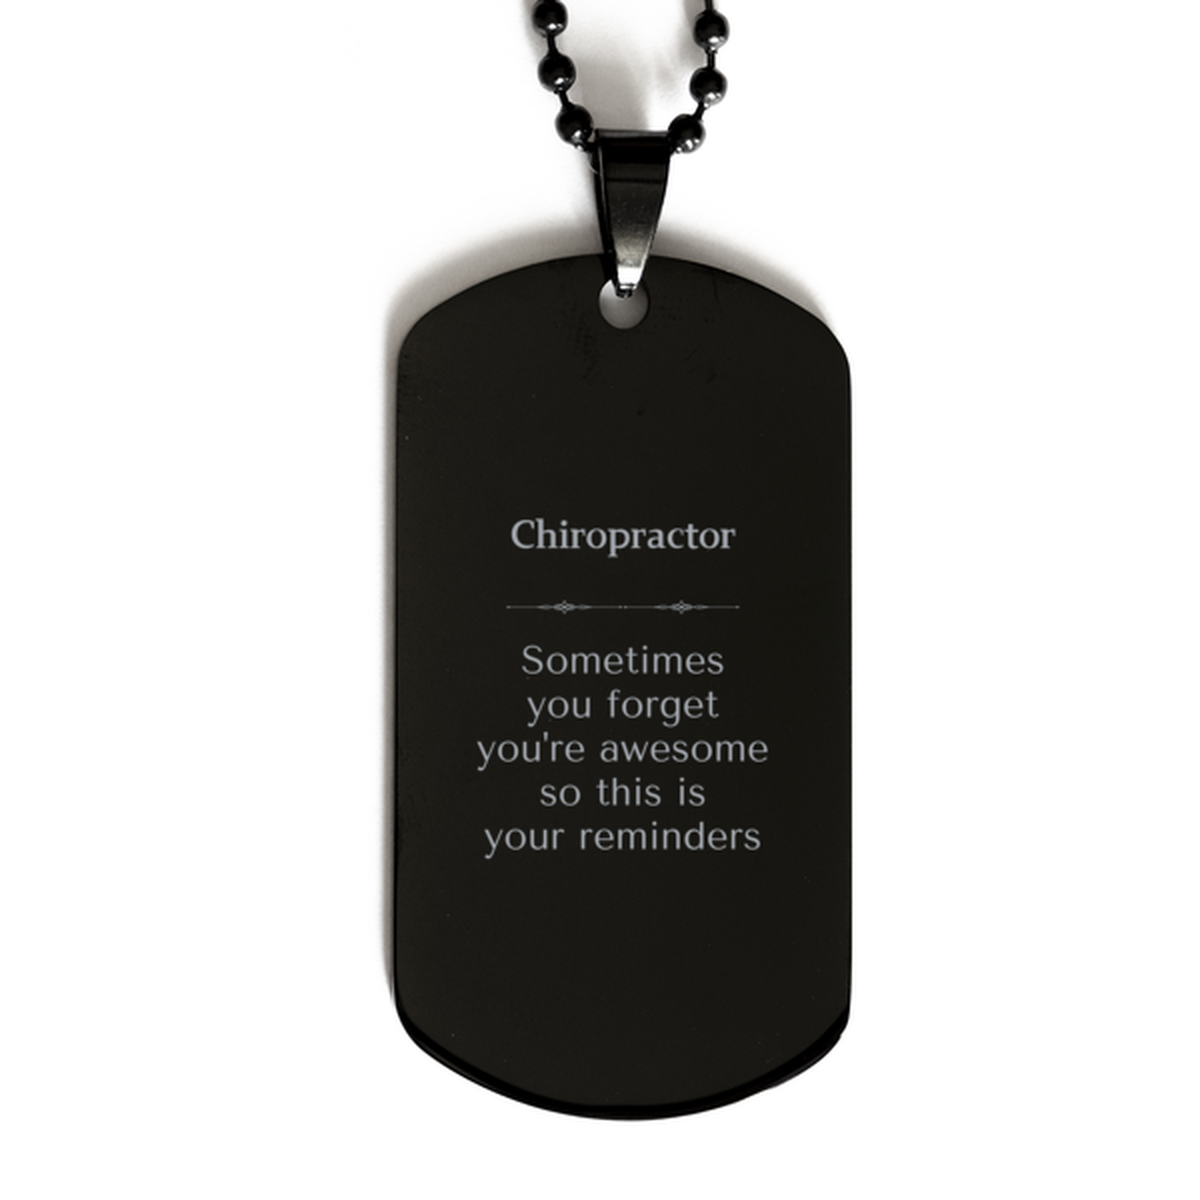 Sentimental Chiropractor Black Dog Tag, Chiropractor Sometimes you forget you're awesome so this is your reminders, Graduation Christmas Birthday Gifts for Chiropractor, Men, Women, Coworkers